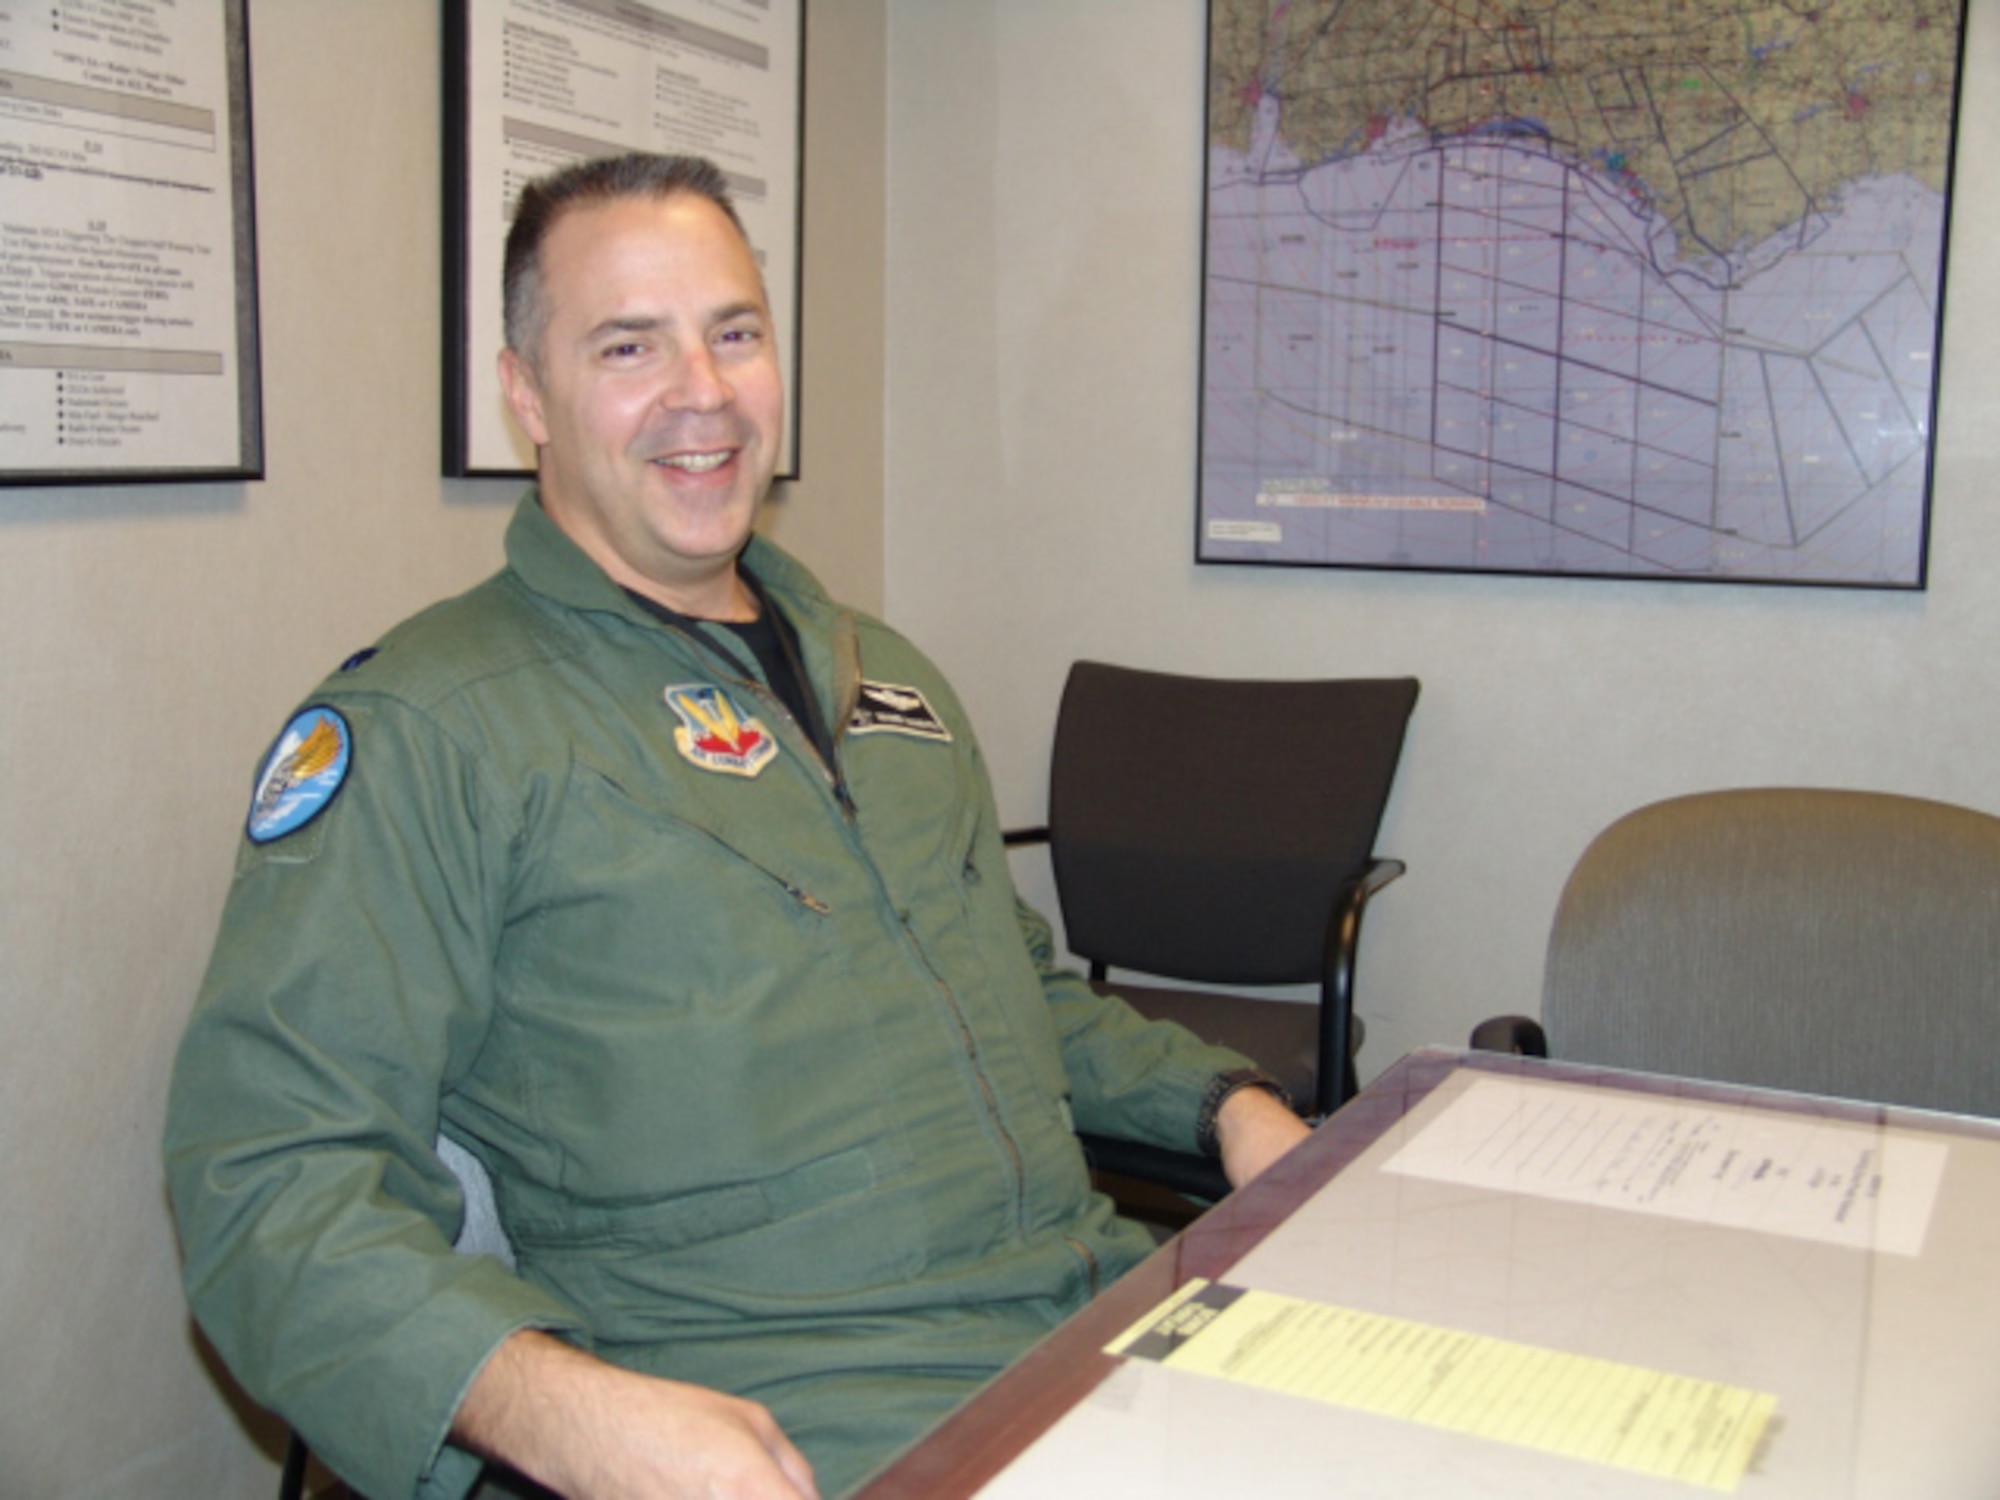 EGLIN AIR FORCE BASE, Fla. - Lt. Col. Sam Shaneyfelt, recent 85th Test and Evaluation Squadron commander, laughs after talking about the test process at Eglin. The 85th TES pilots test F-15 and F-16 capabilities in combat-simulated scenarios. (Noel Getlin/U.S. Air Force photo)